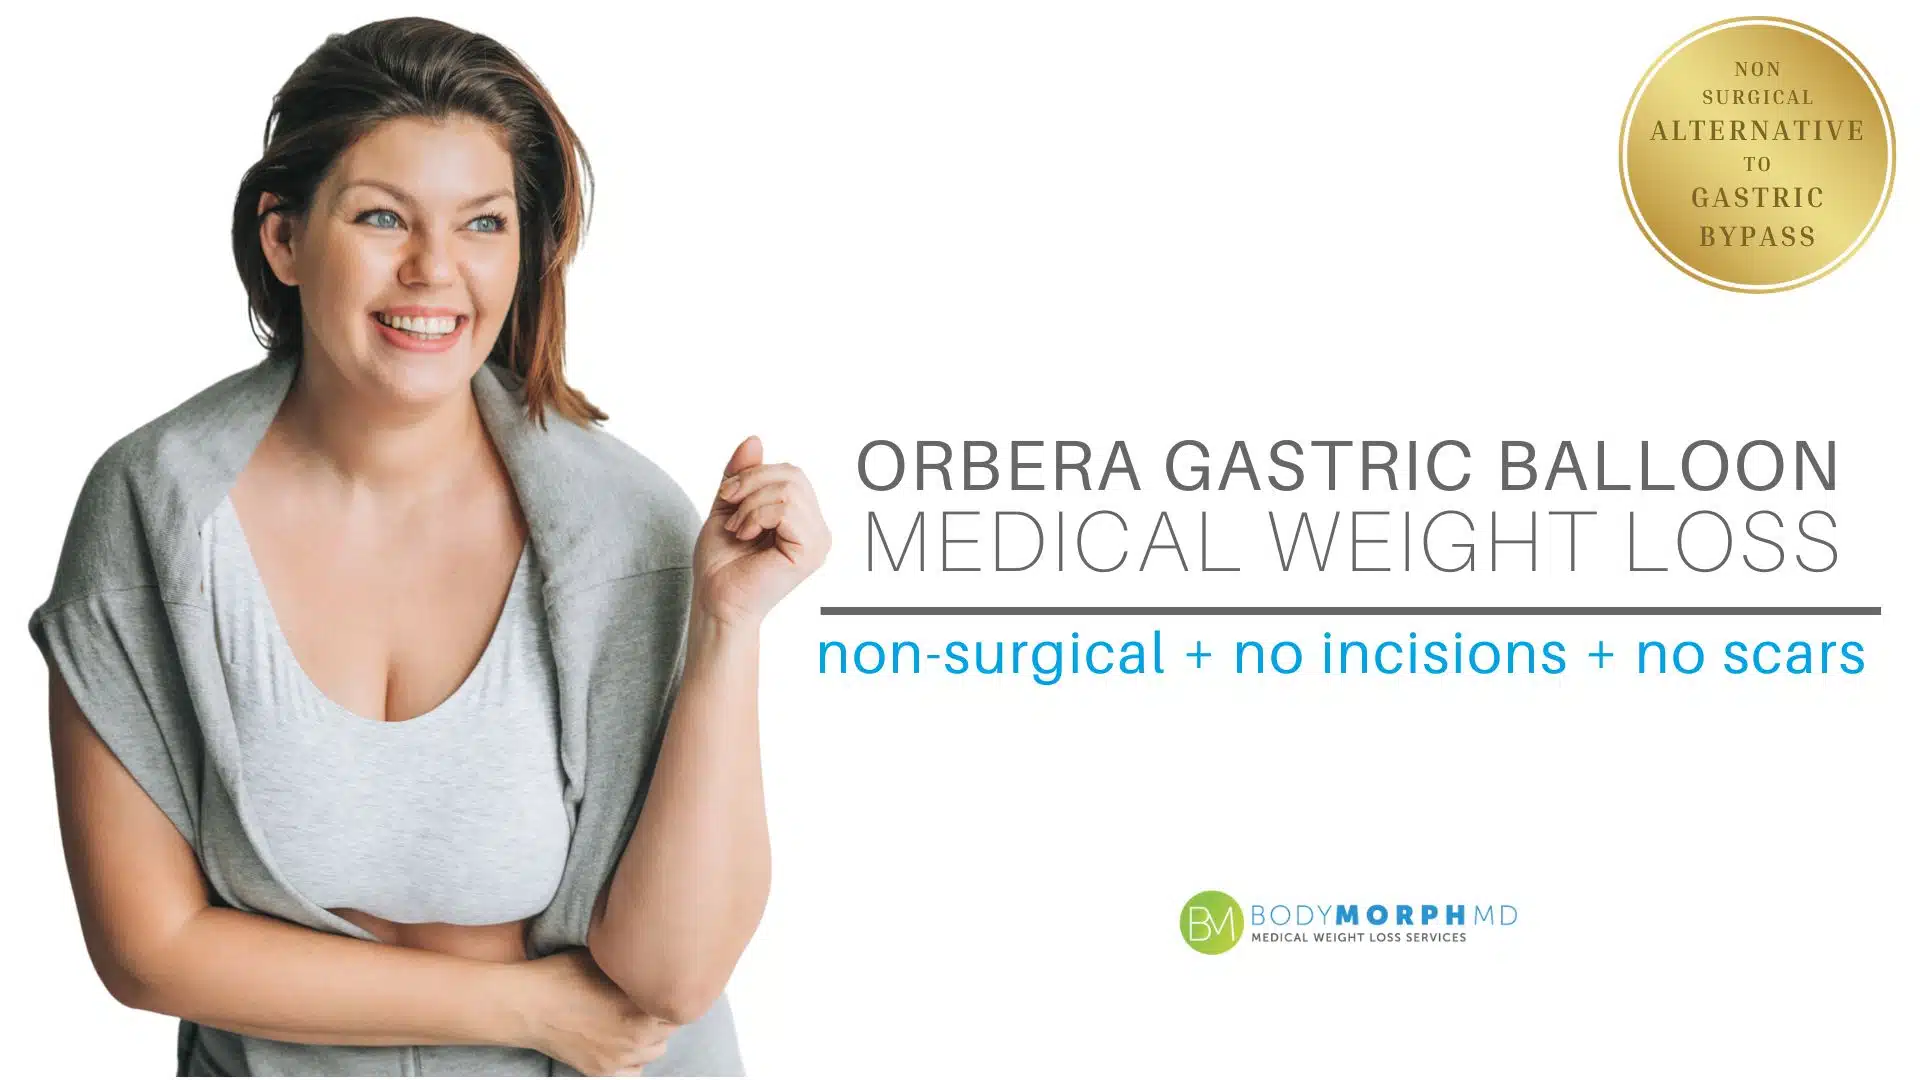 A happy woman is promoting the Orbera Gastric Balloon weight loss treatment offered at BodyMorphMD in Harrison and Yonkers, NY.